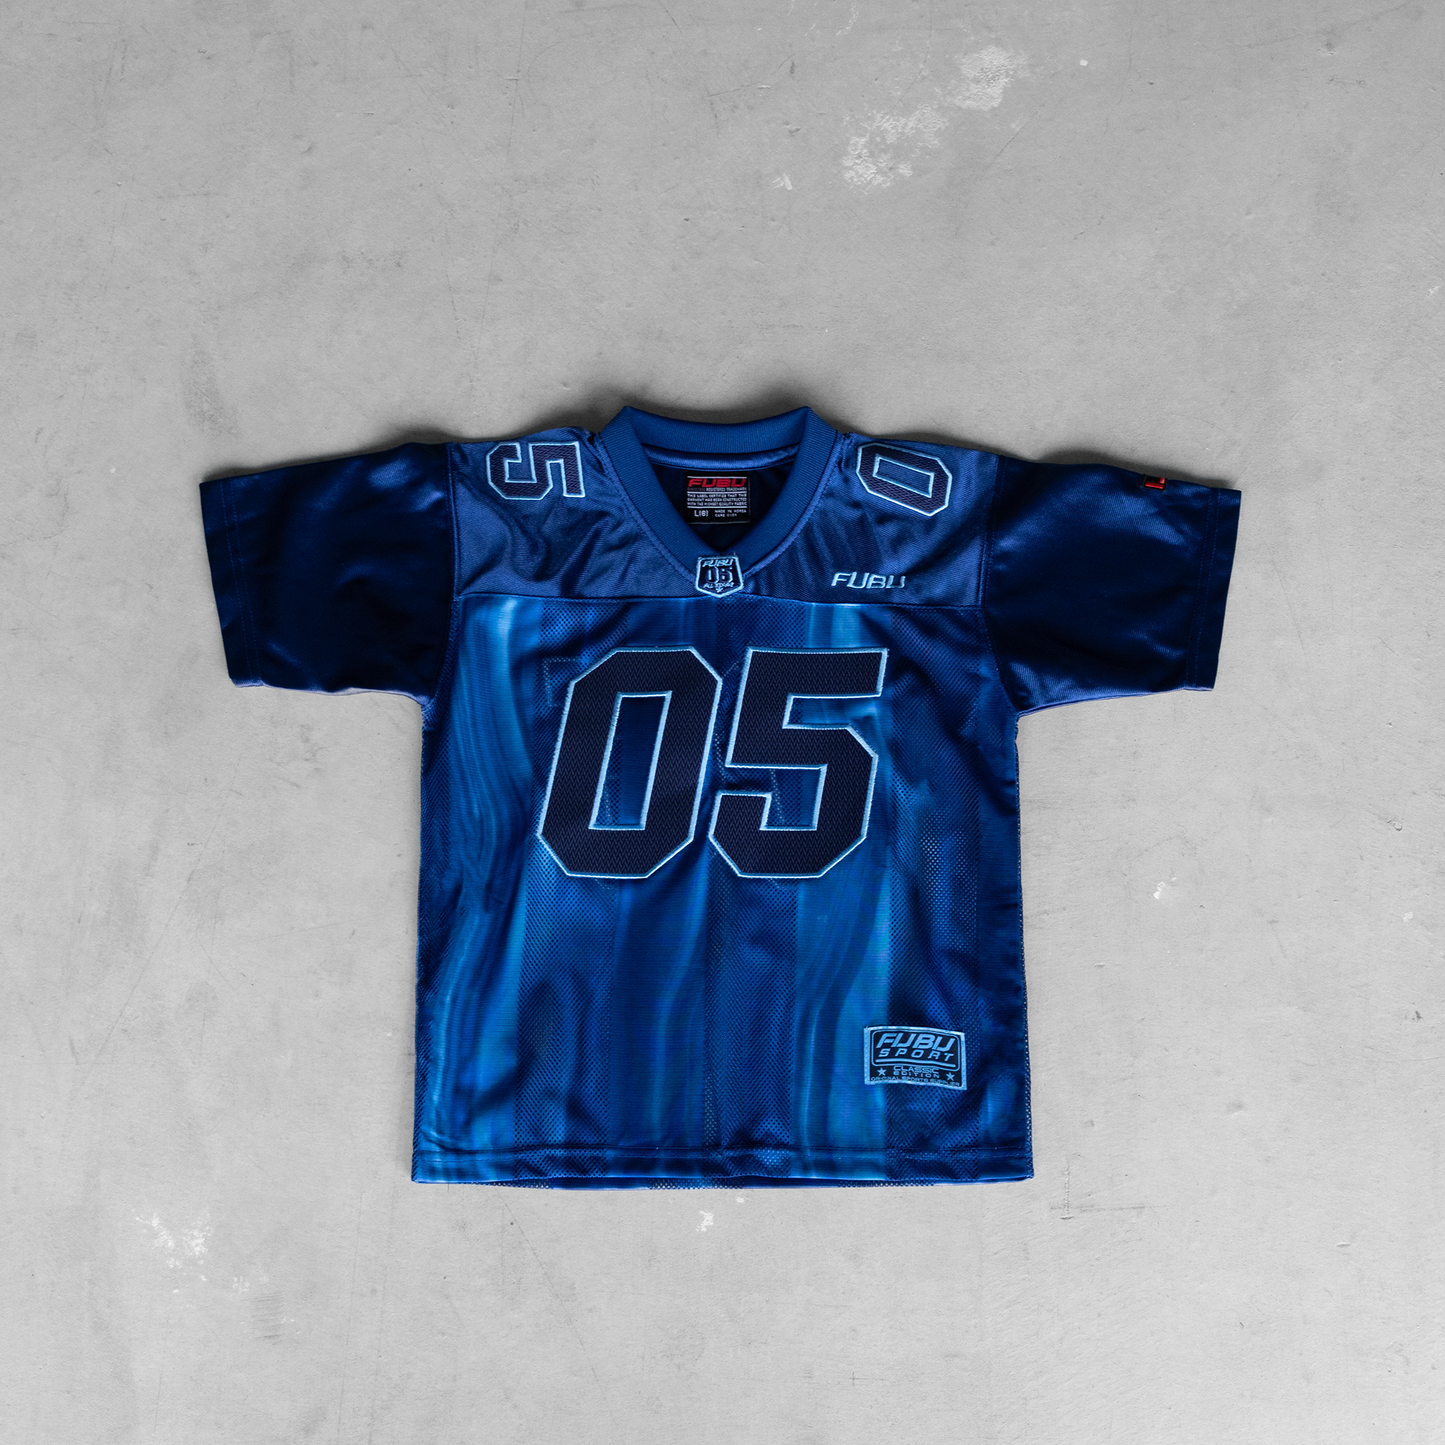 Vintage 90's FUBU All Stars #05 Youth Football Style Jersey